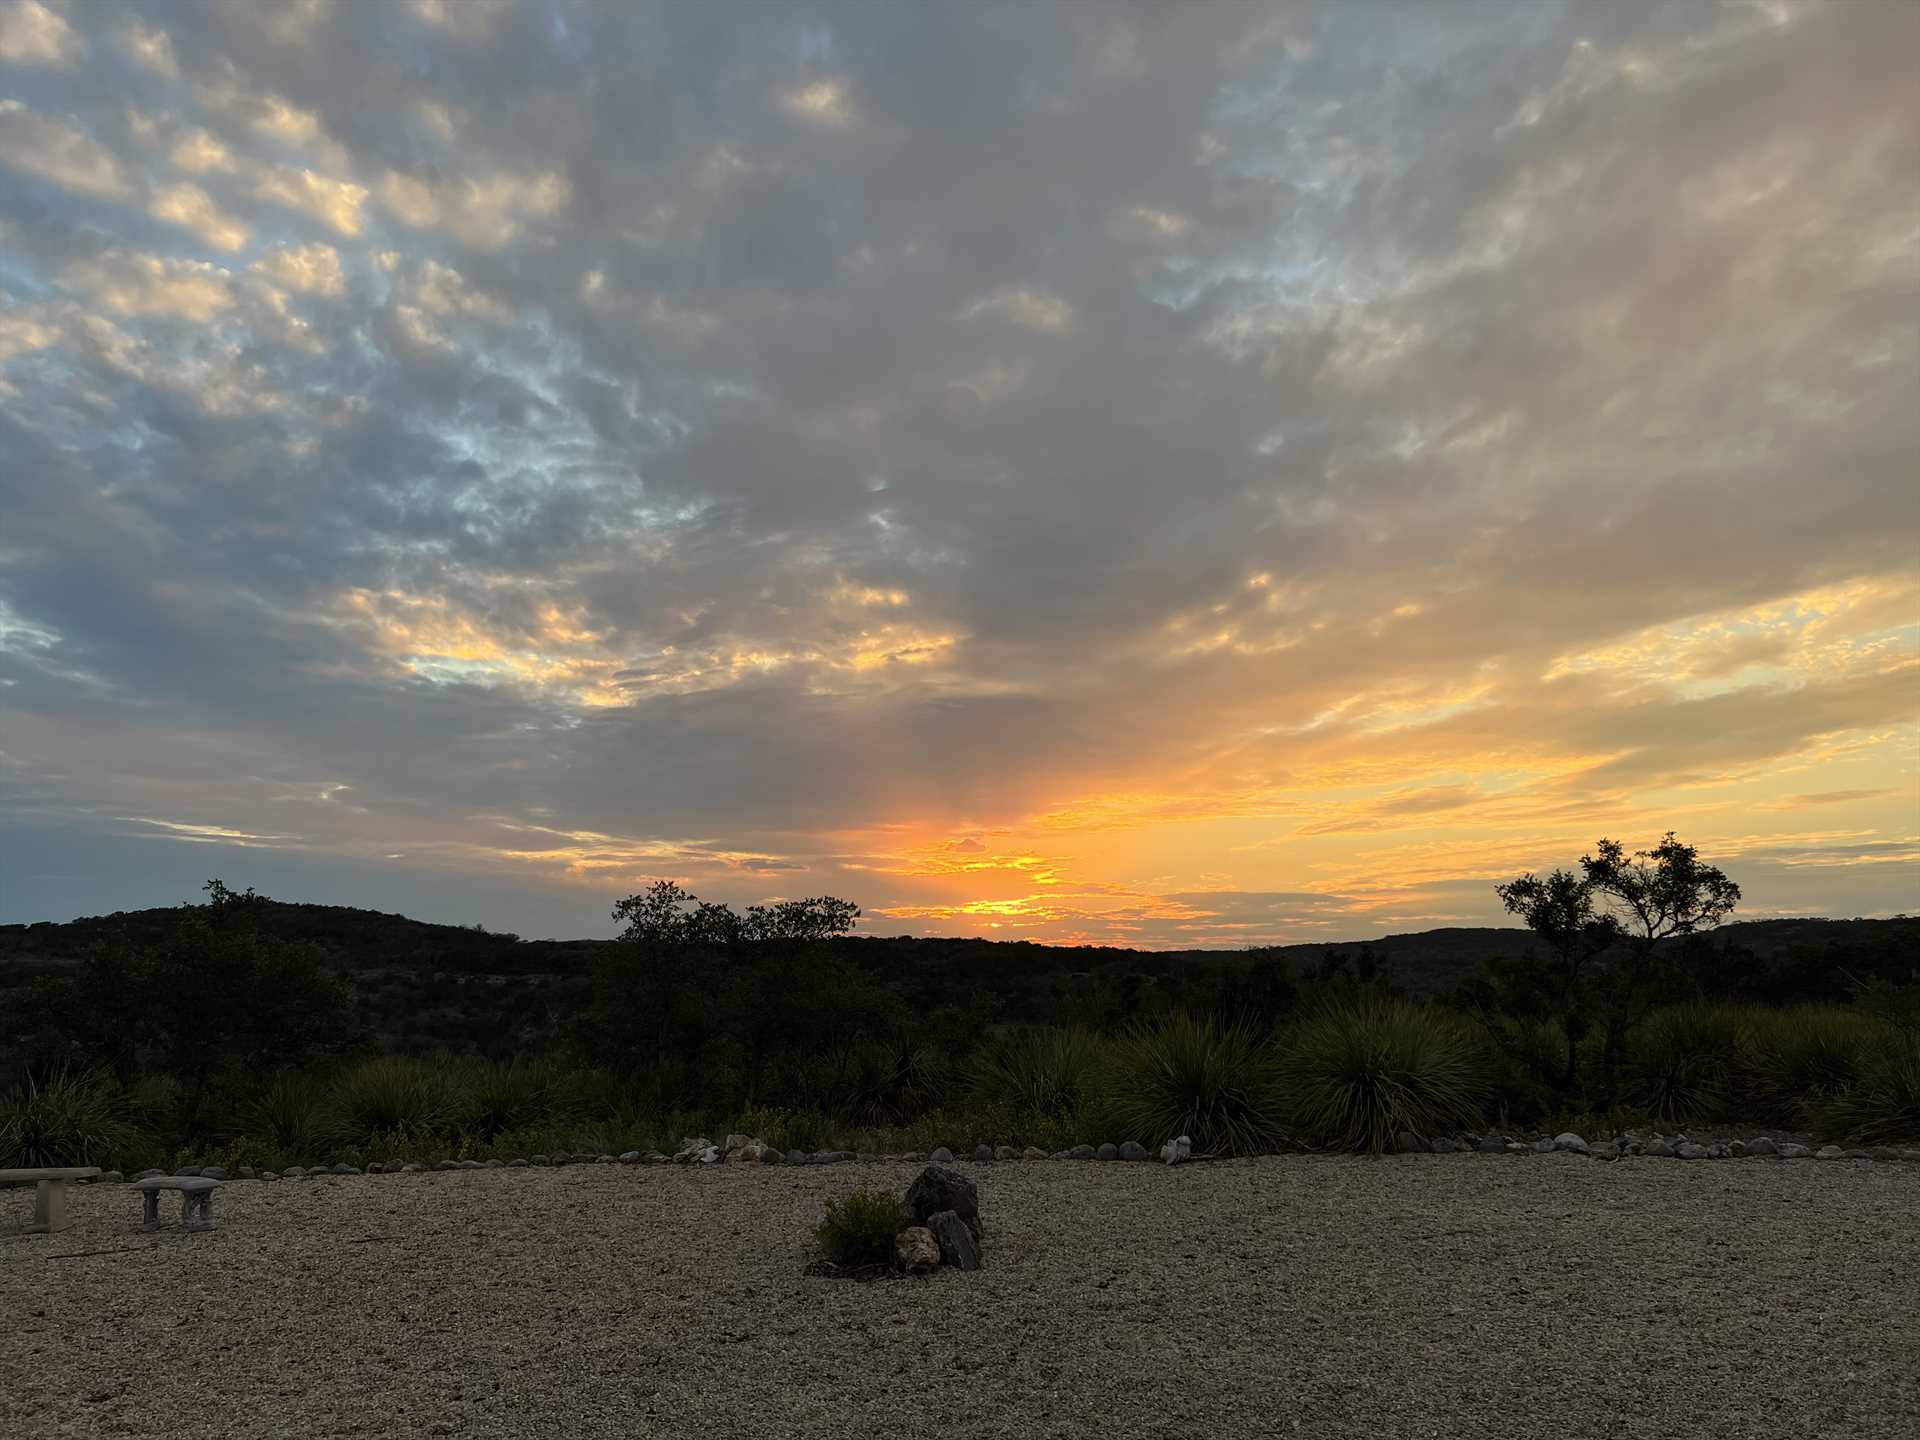                                                 With the wide-open Texas skies here, stargazing and viewing fiery and colorful Hill Country sunsets are a must!